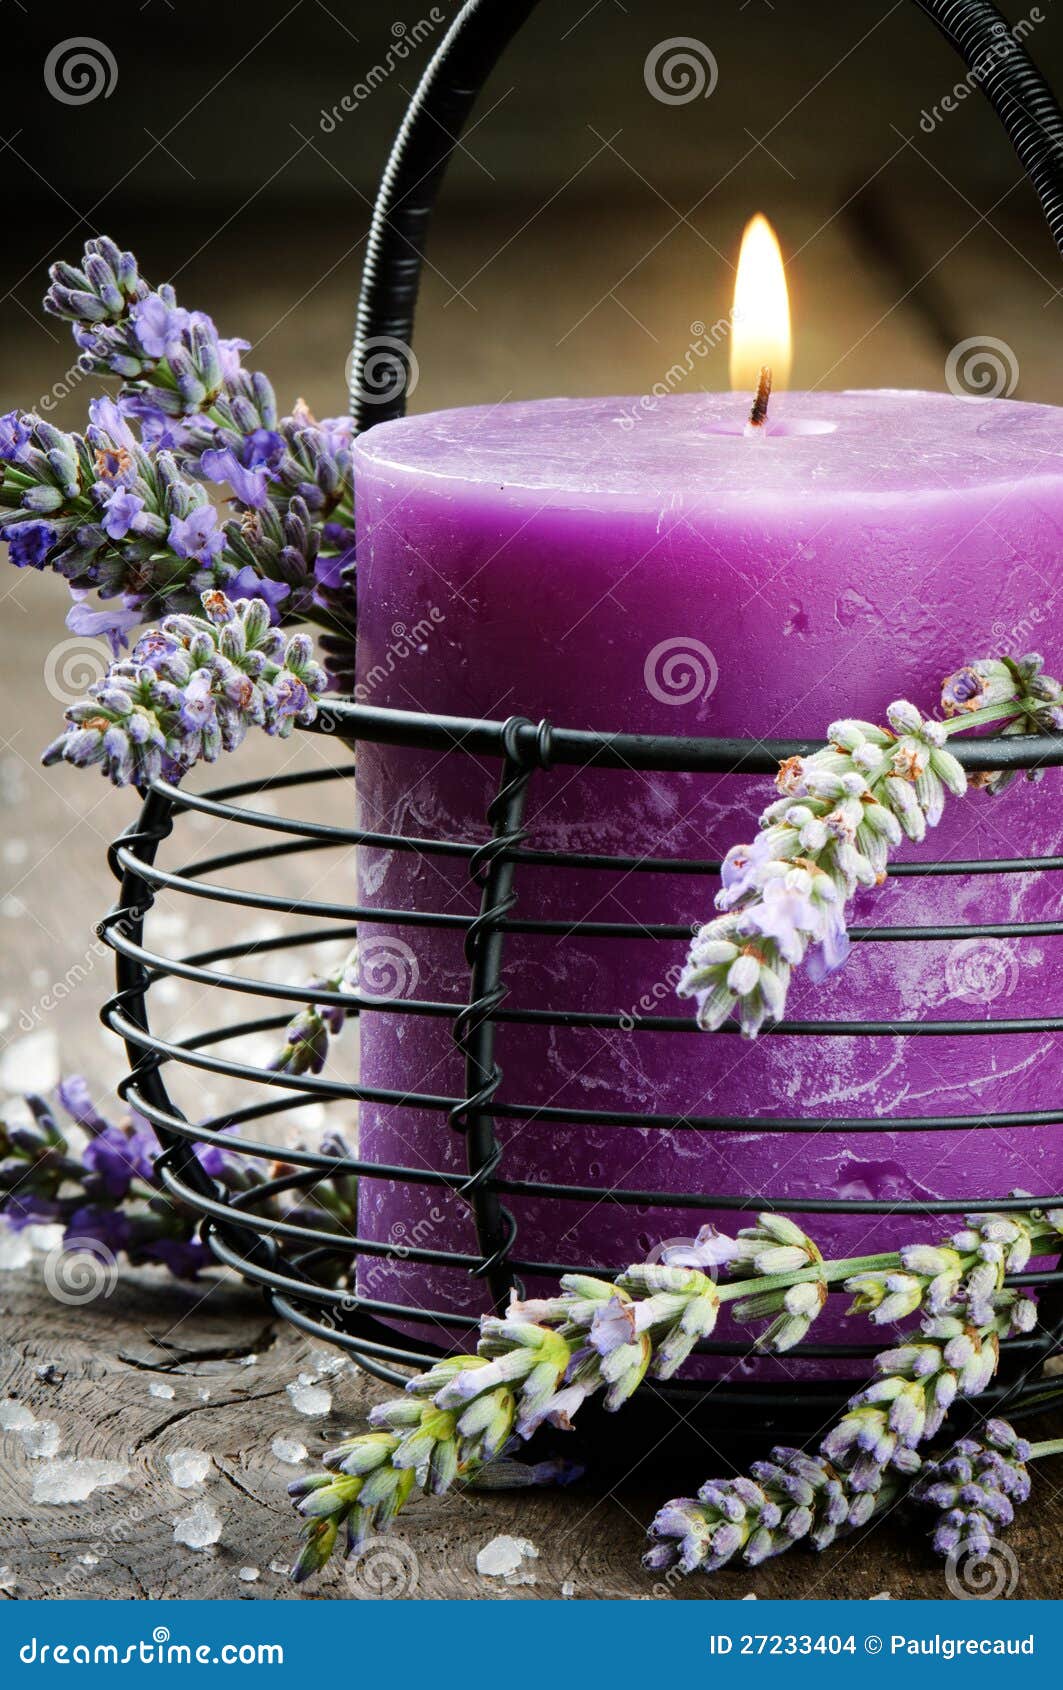 Candle With Lavender Flowers Stock Images - Image: 27233404